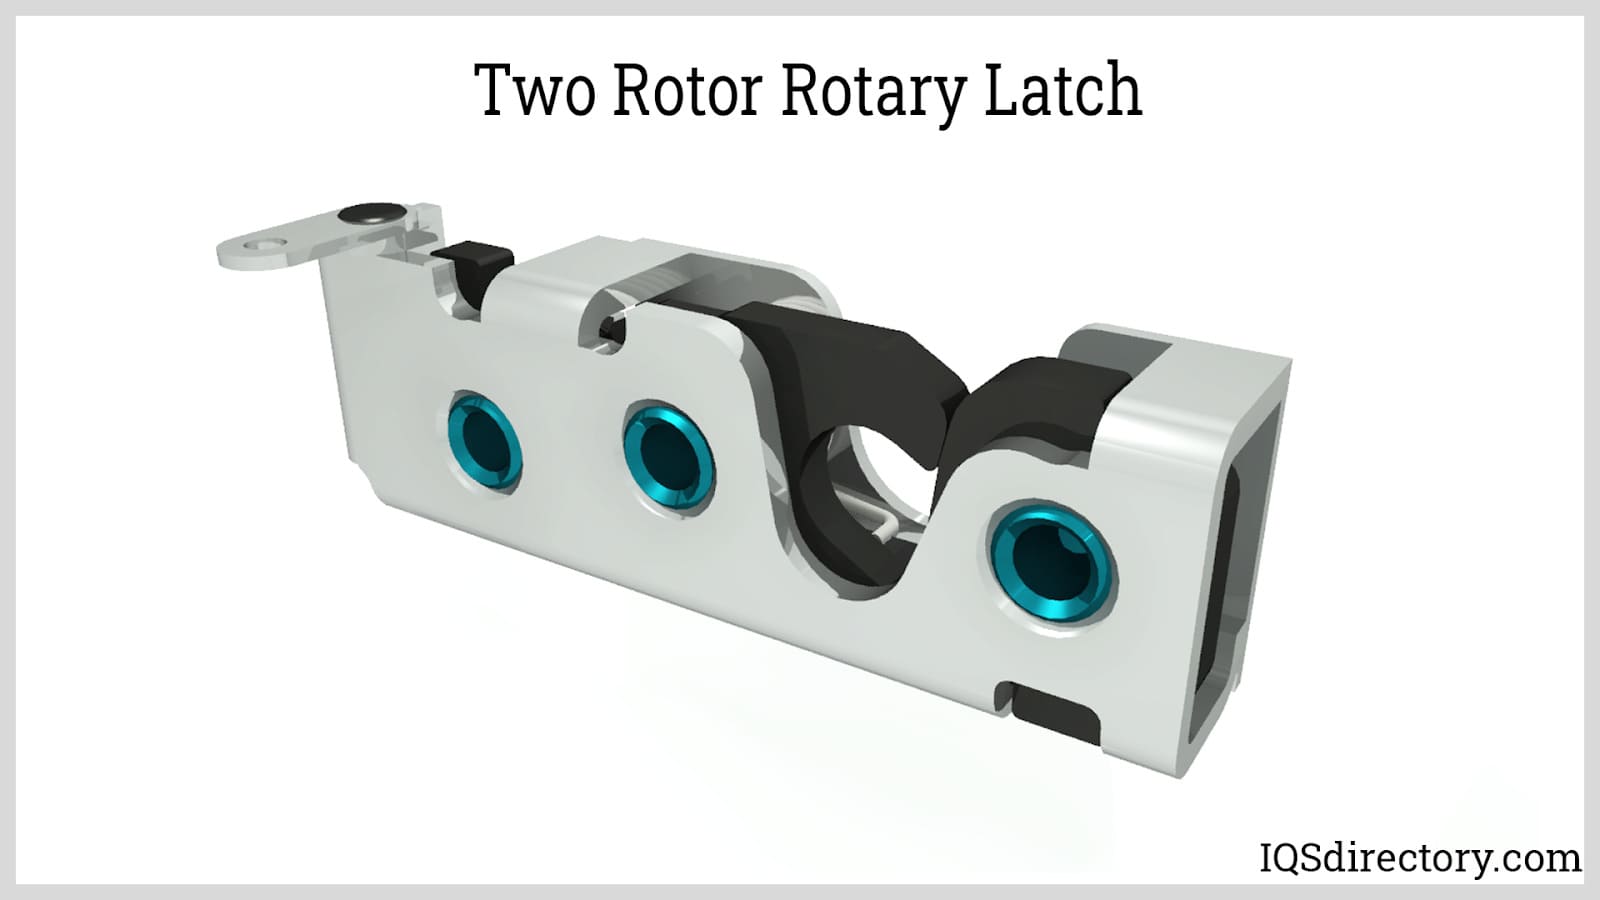 Two Rotor Rotary Latch